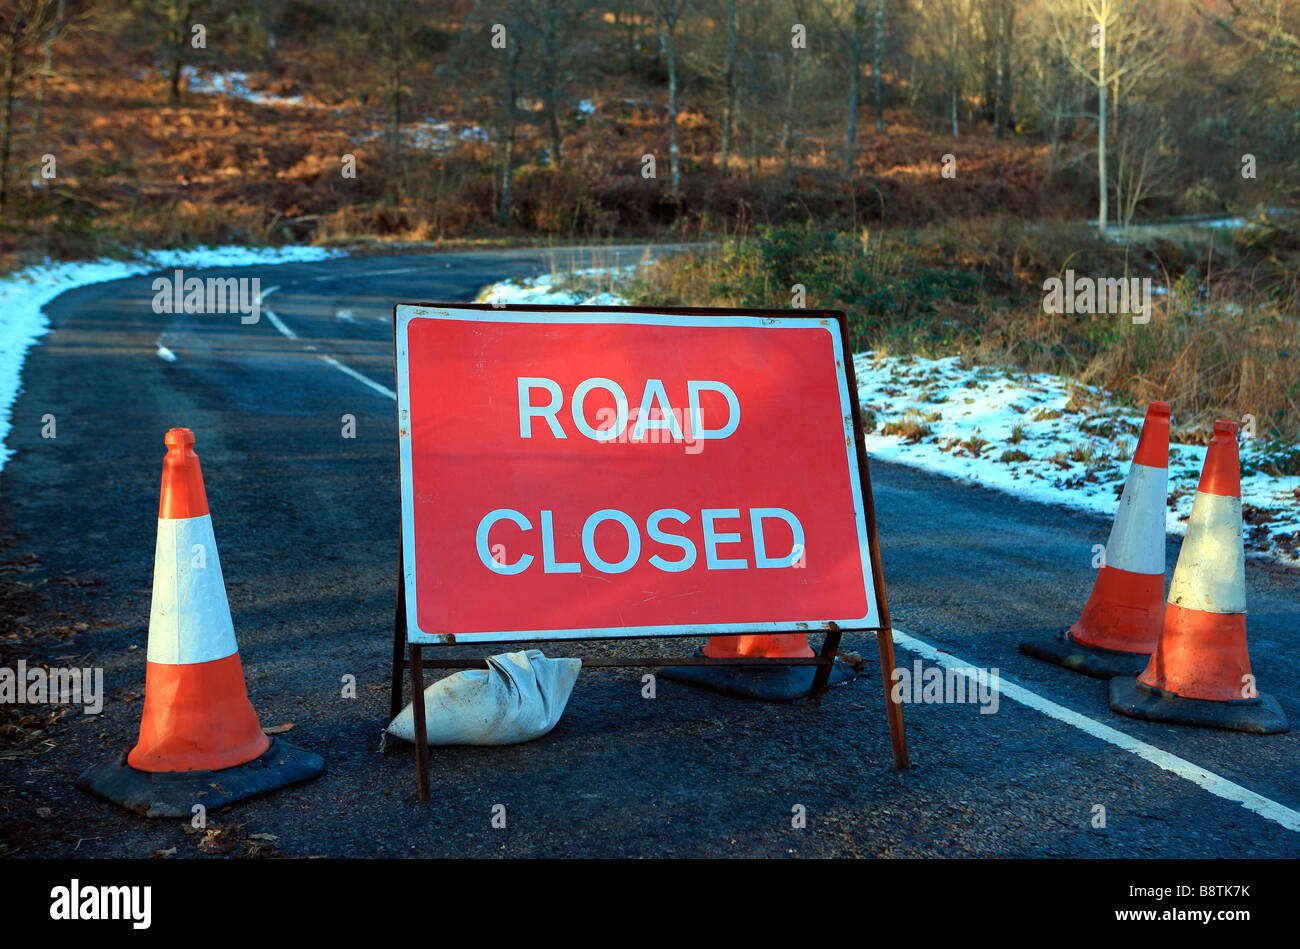 Road closed sign Stock Photo